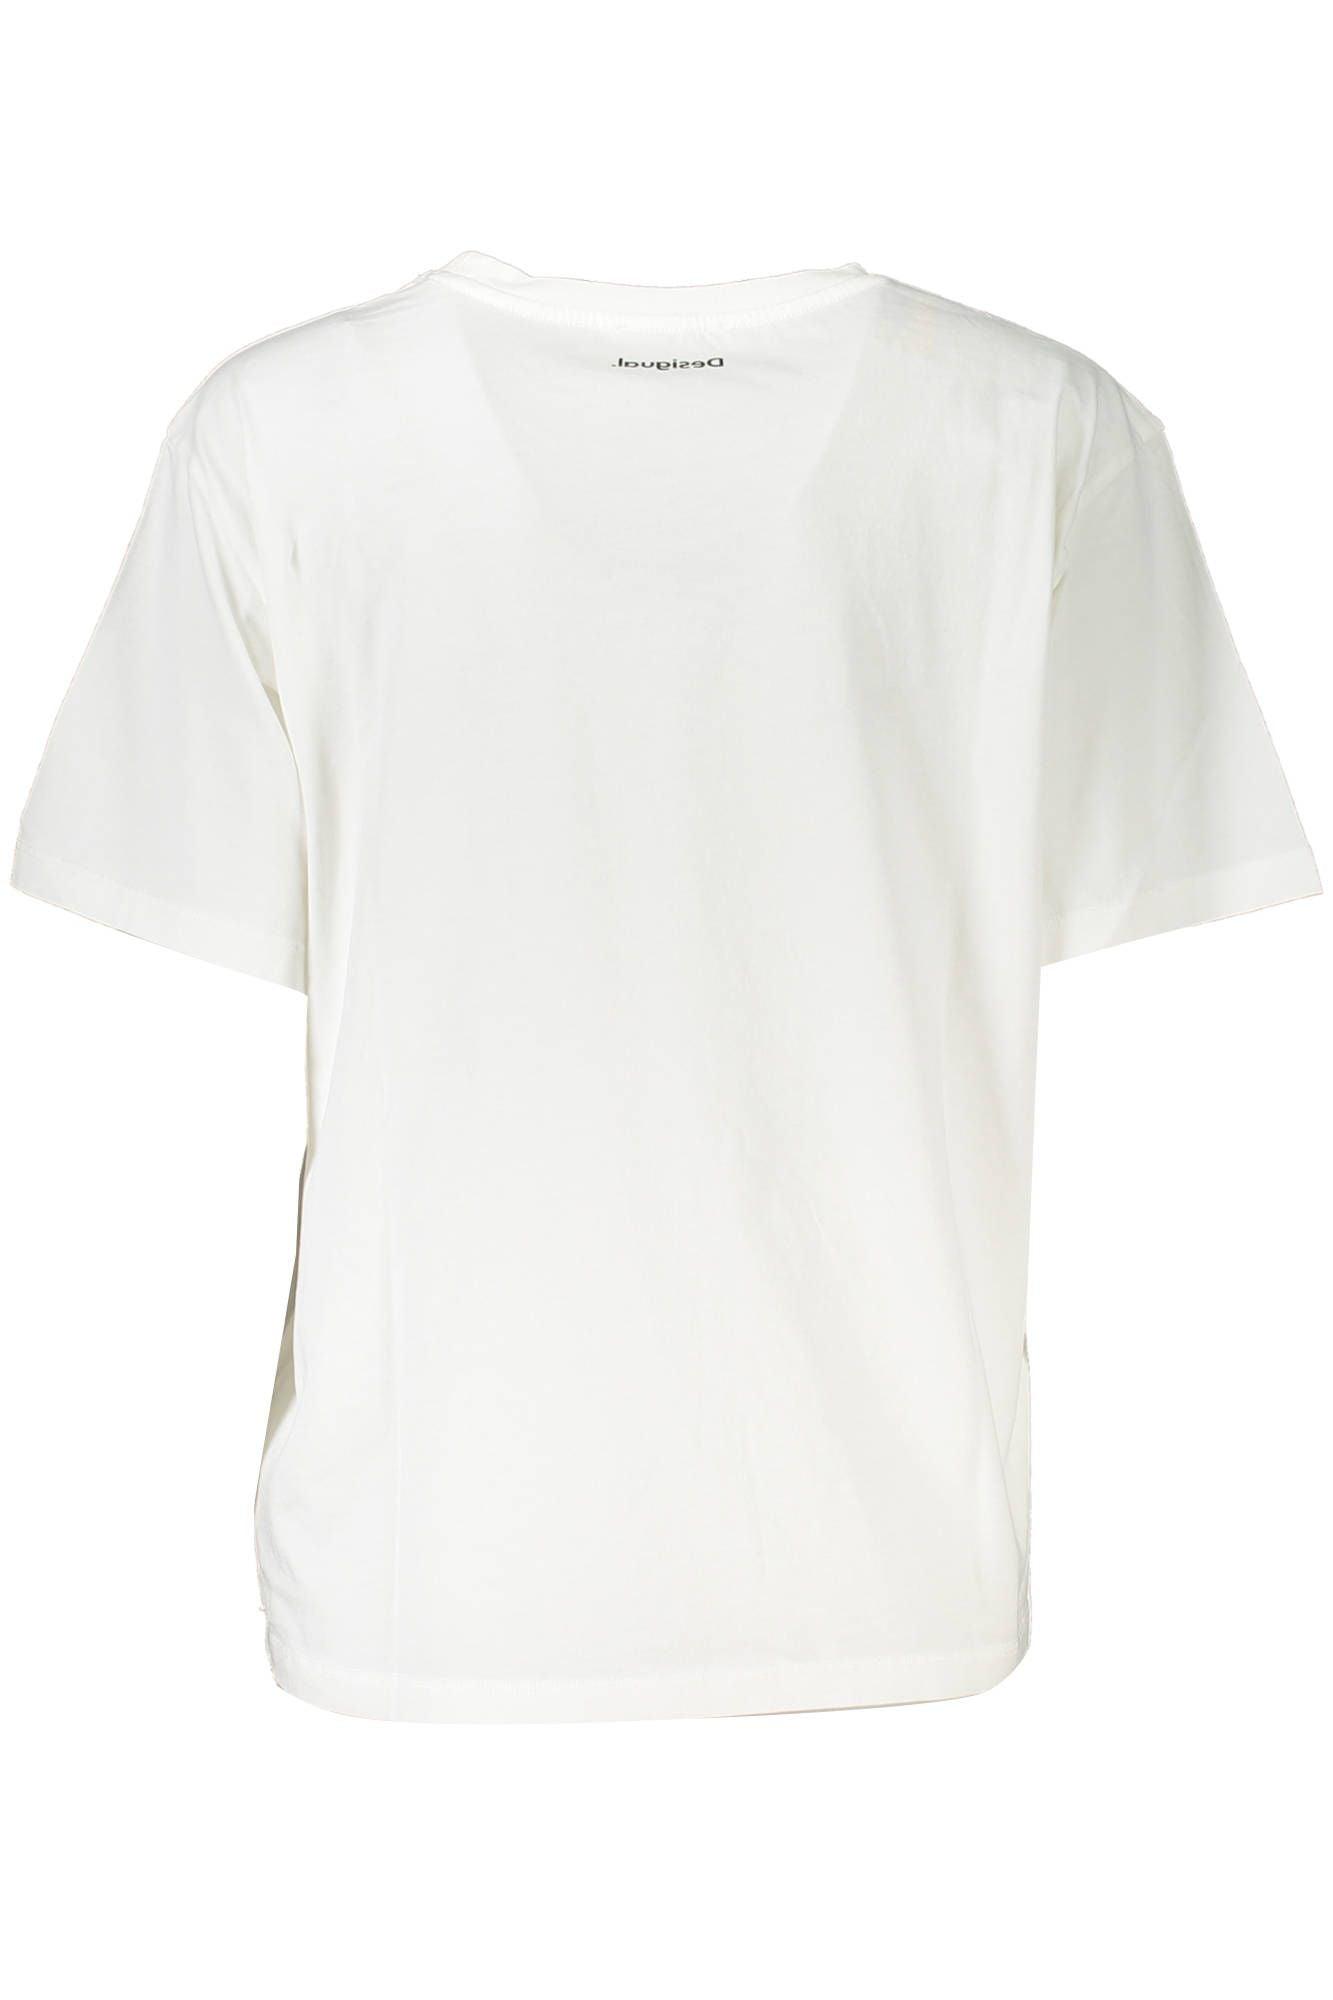 Desigual Chic Embroidered White Tee with Artistic Flair - PER.FASHION